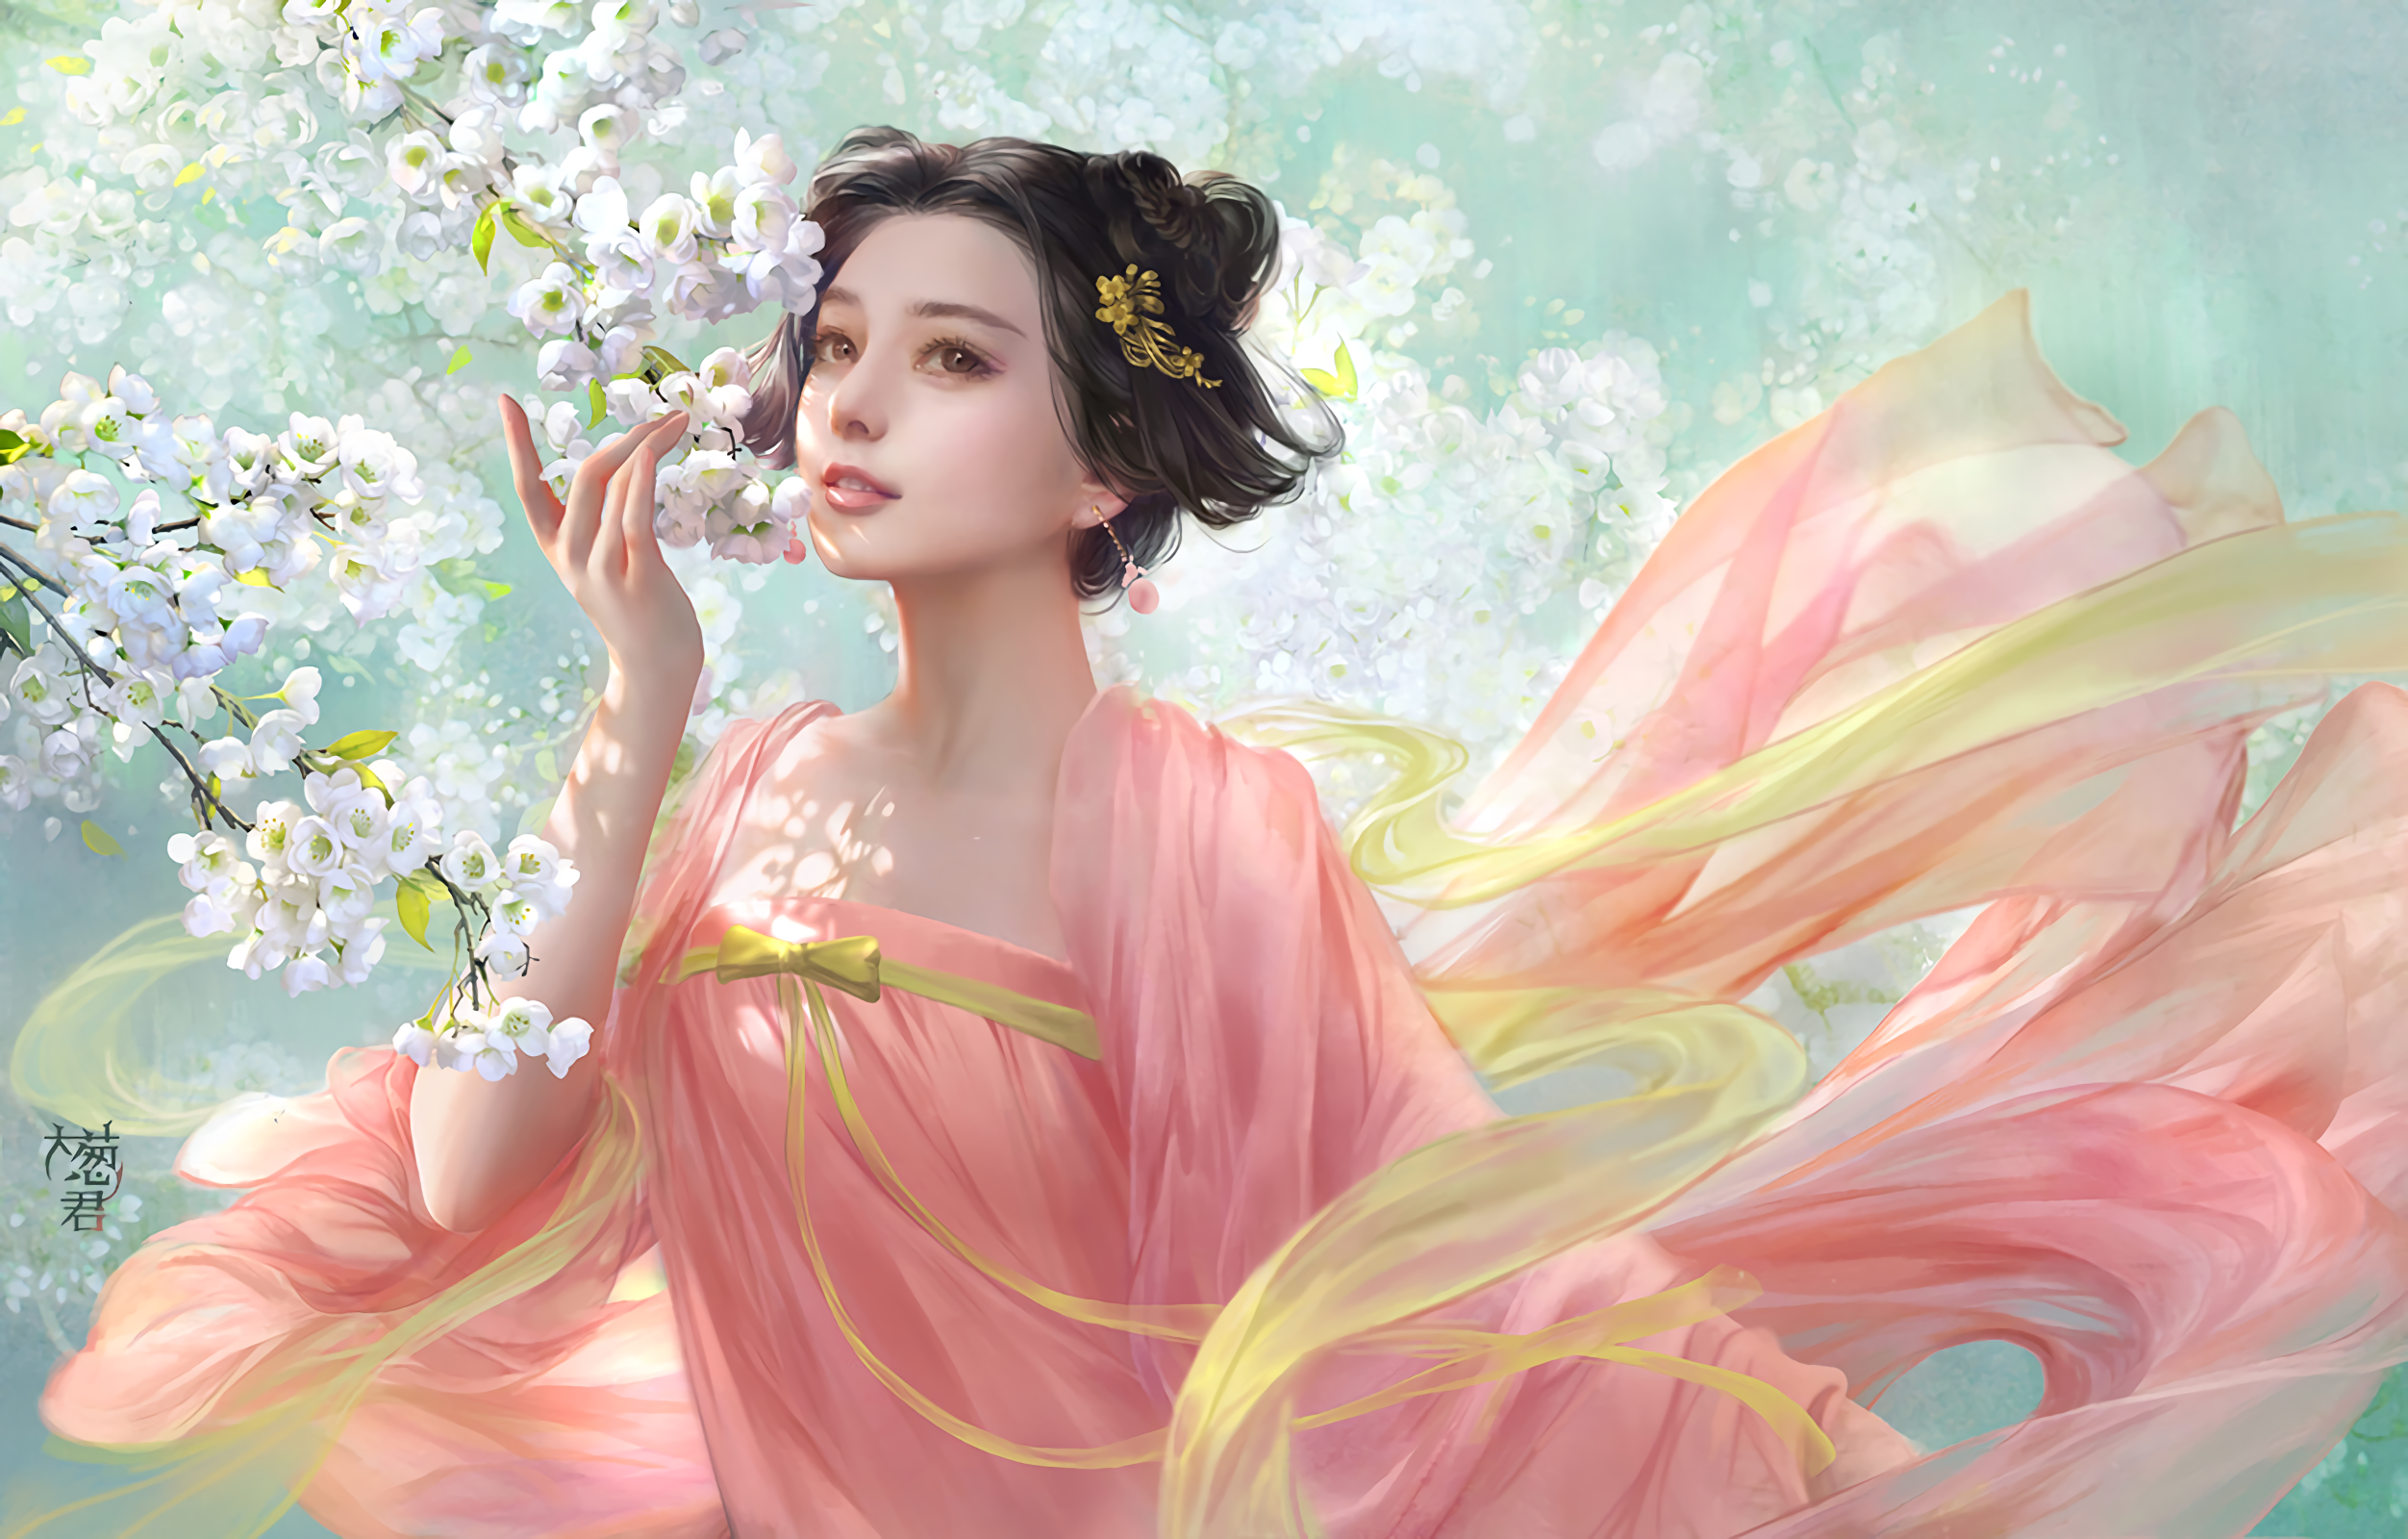 Fantasy Girl HD Wallpaper | Background Image | 2504x1600 | ID:695475 - Wallpaper Abyss